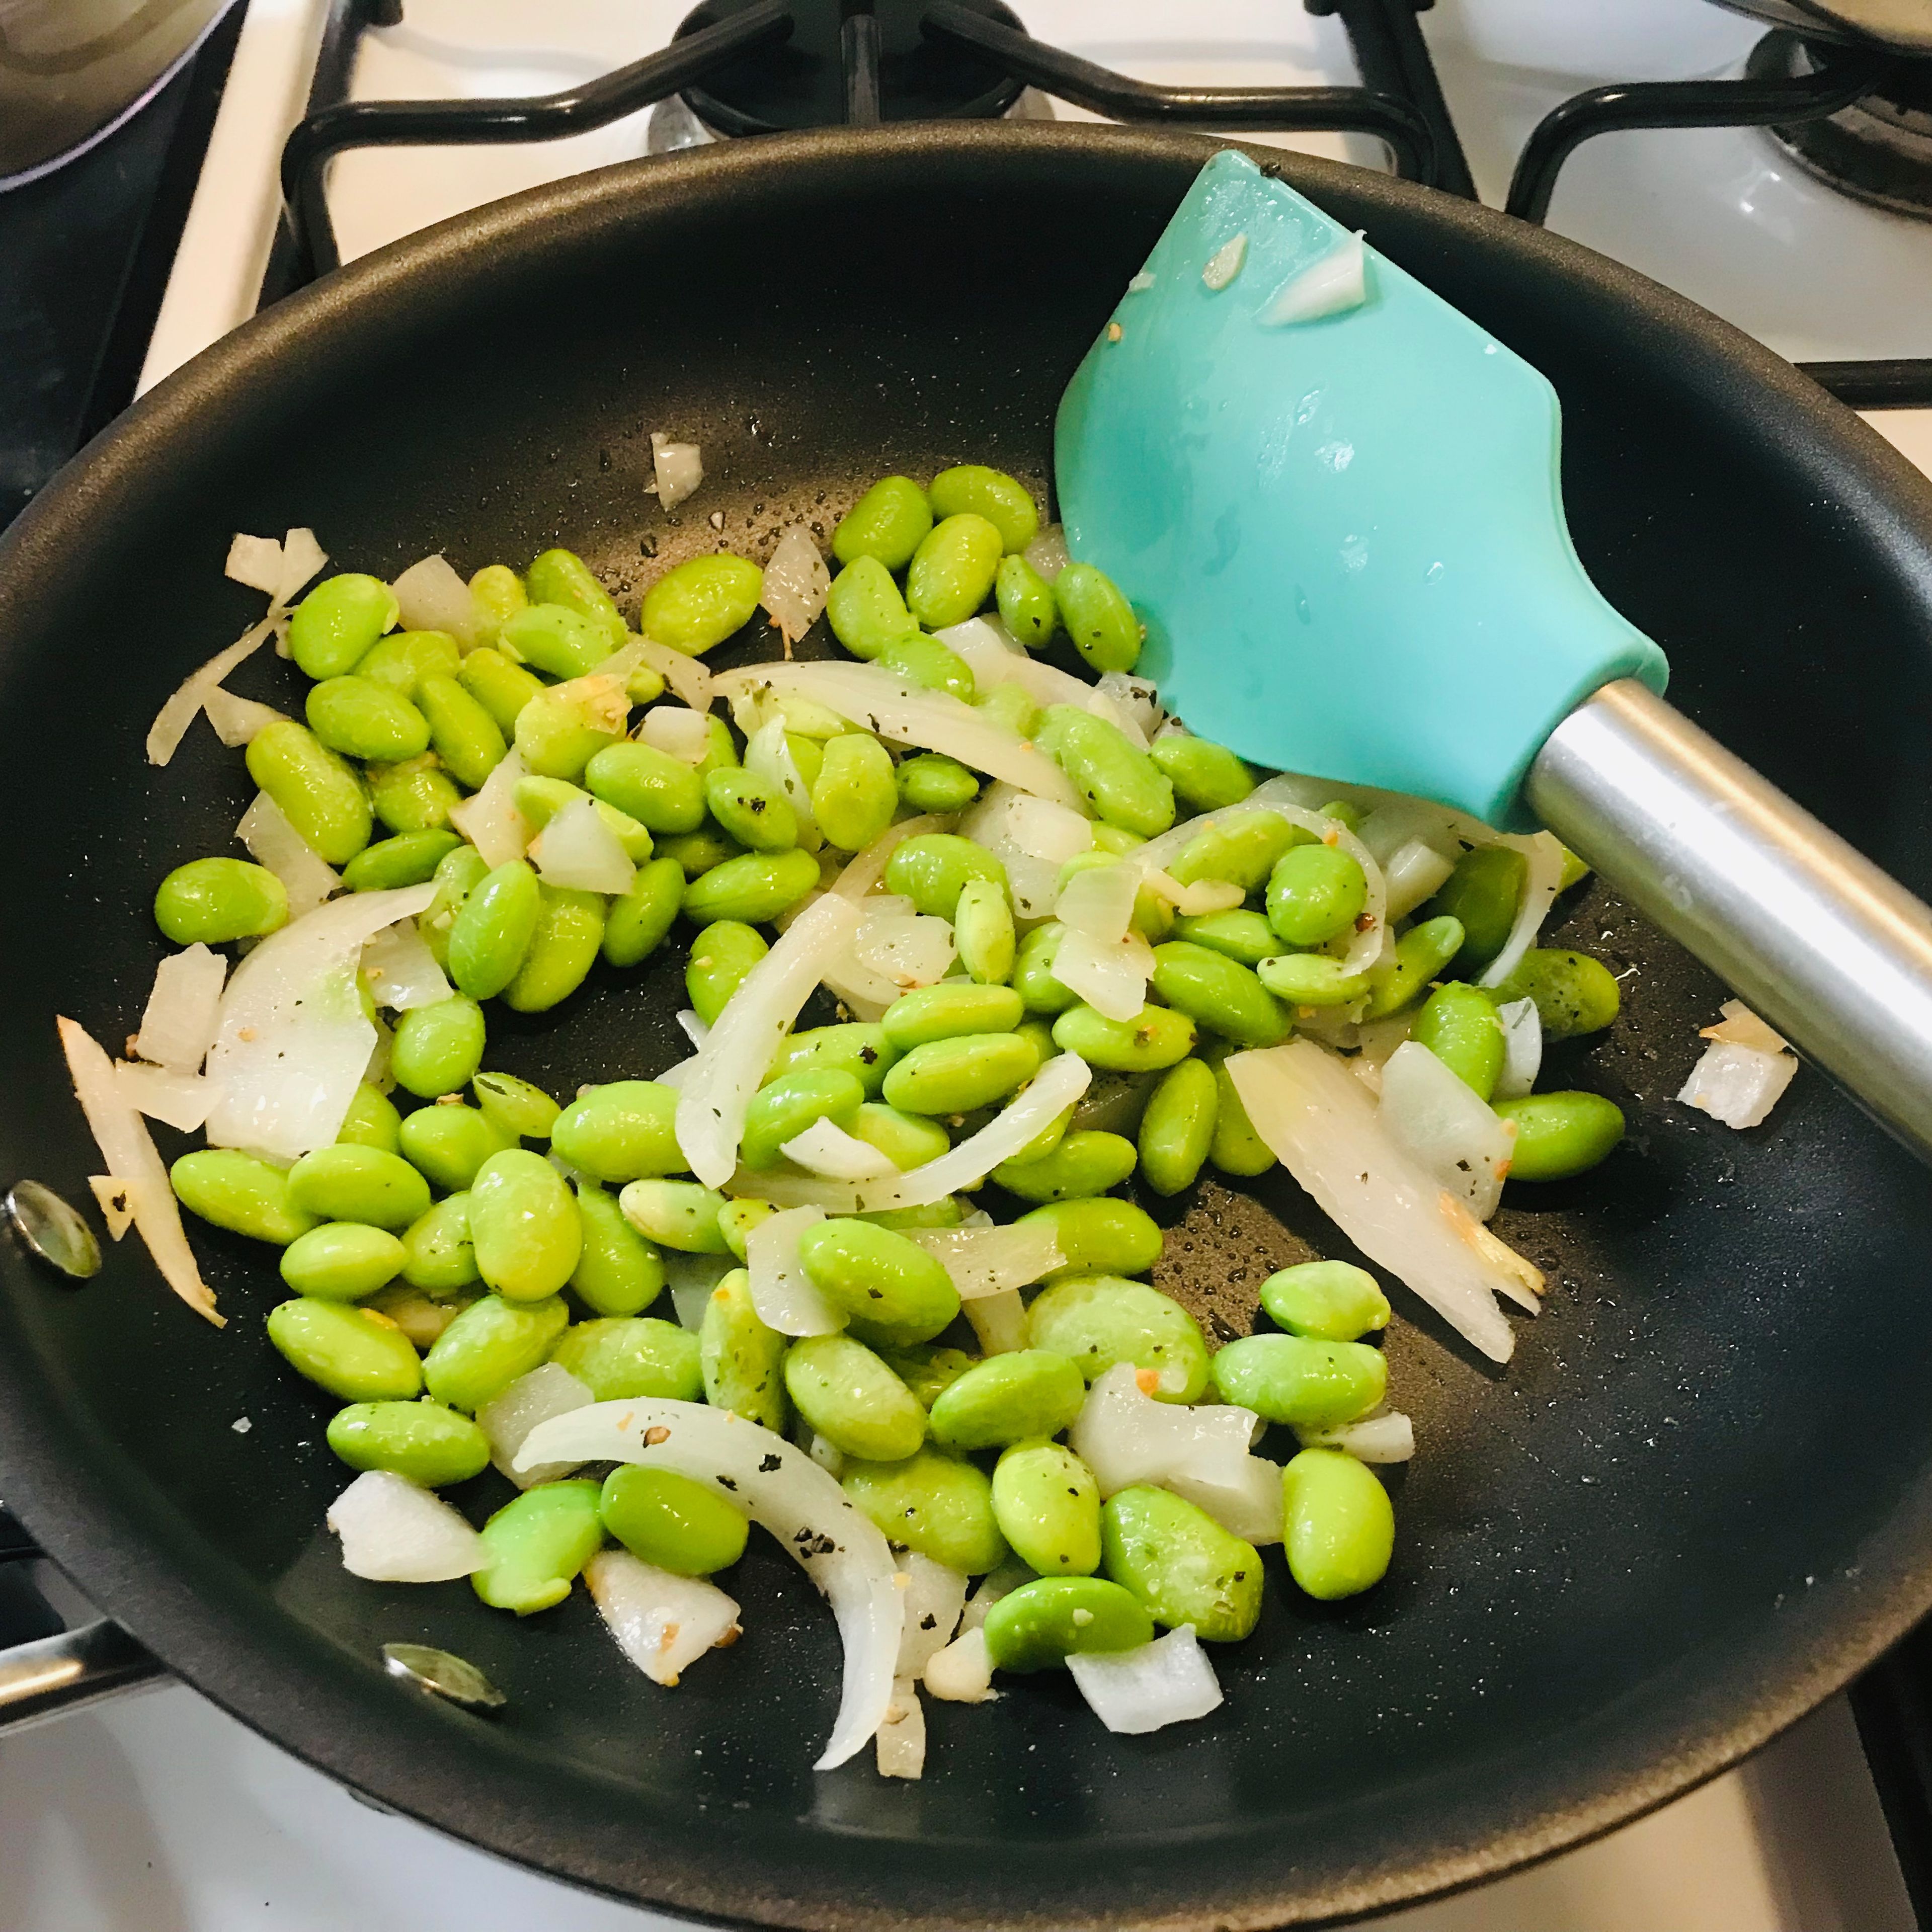 Cook the “beans”: In the same nonstick pan (no need to wash), turn heat to medium and add canola or vegetable oil. Sauté the onion and edamame for 3-5 minutes. Season with salt and ground pepper.